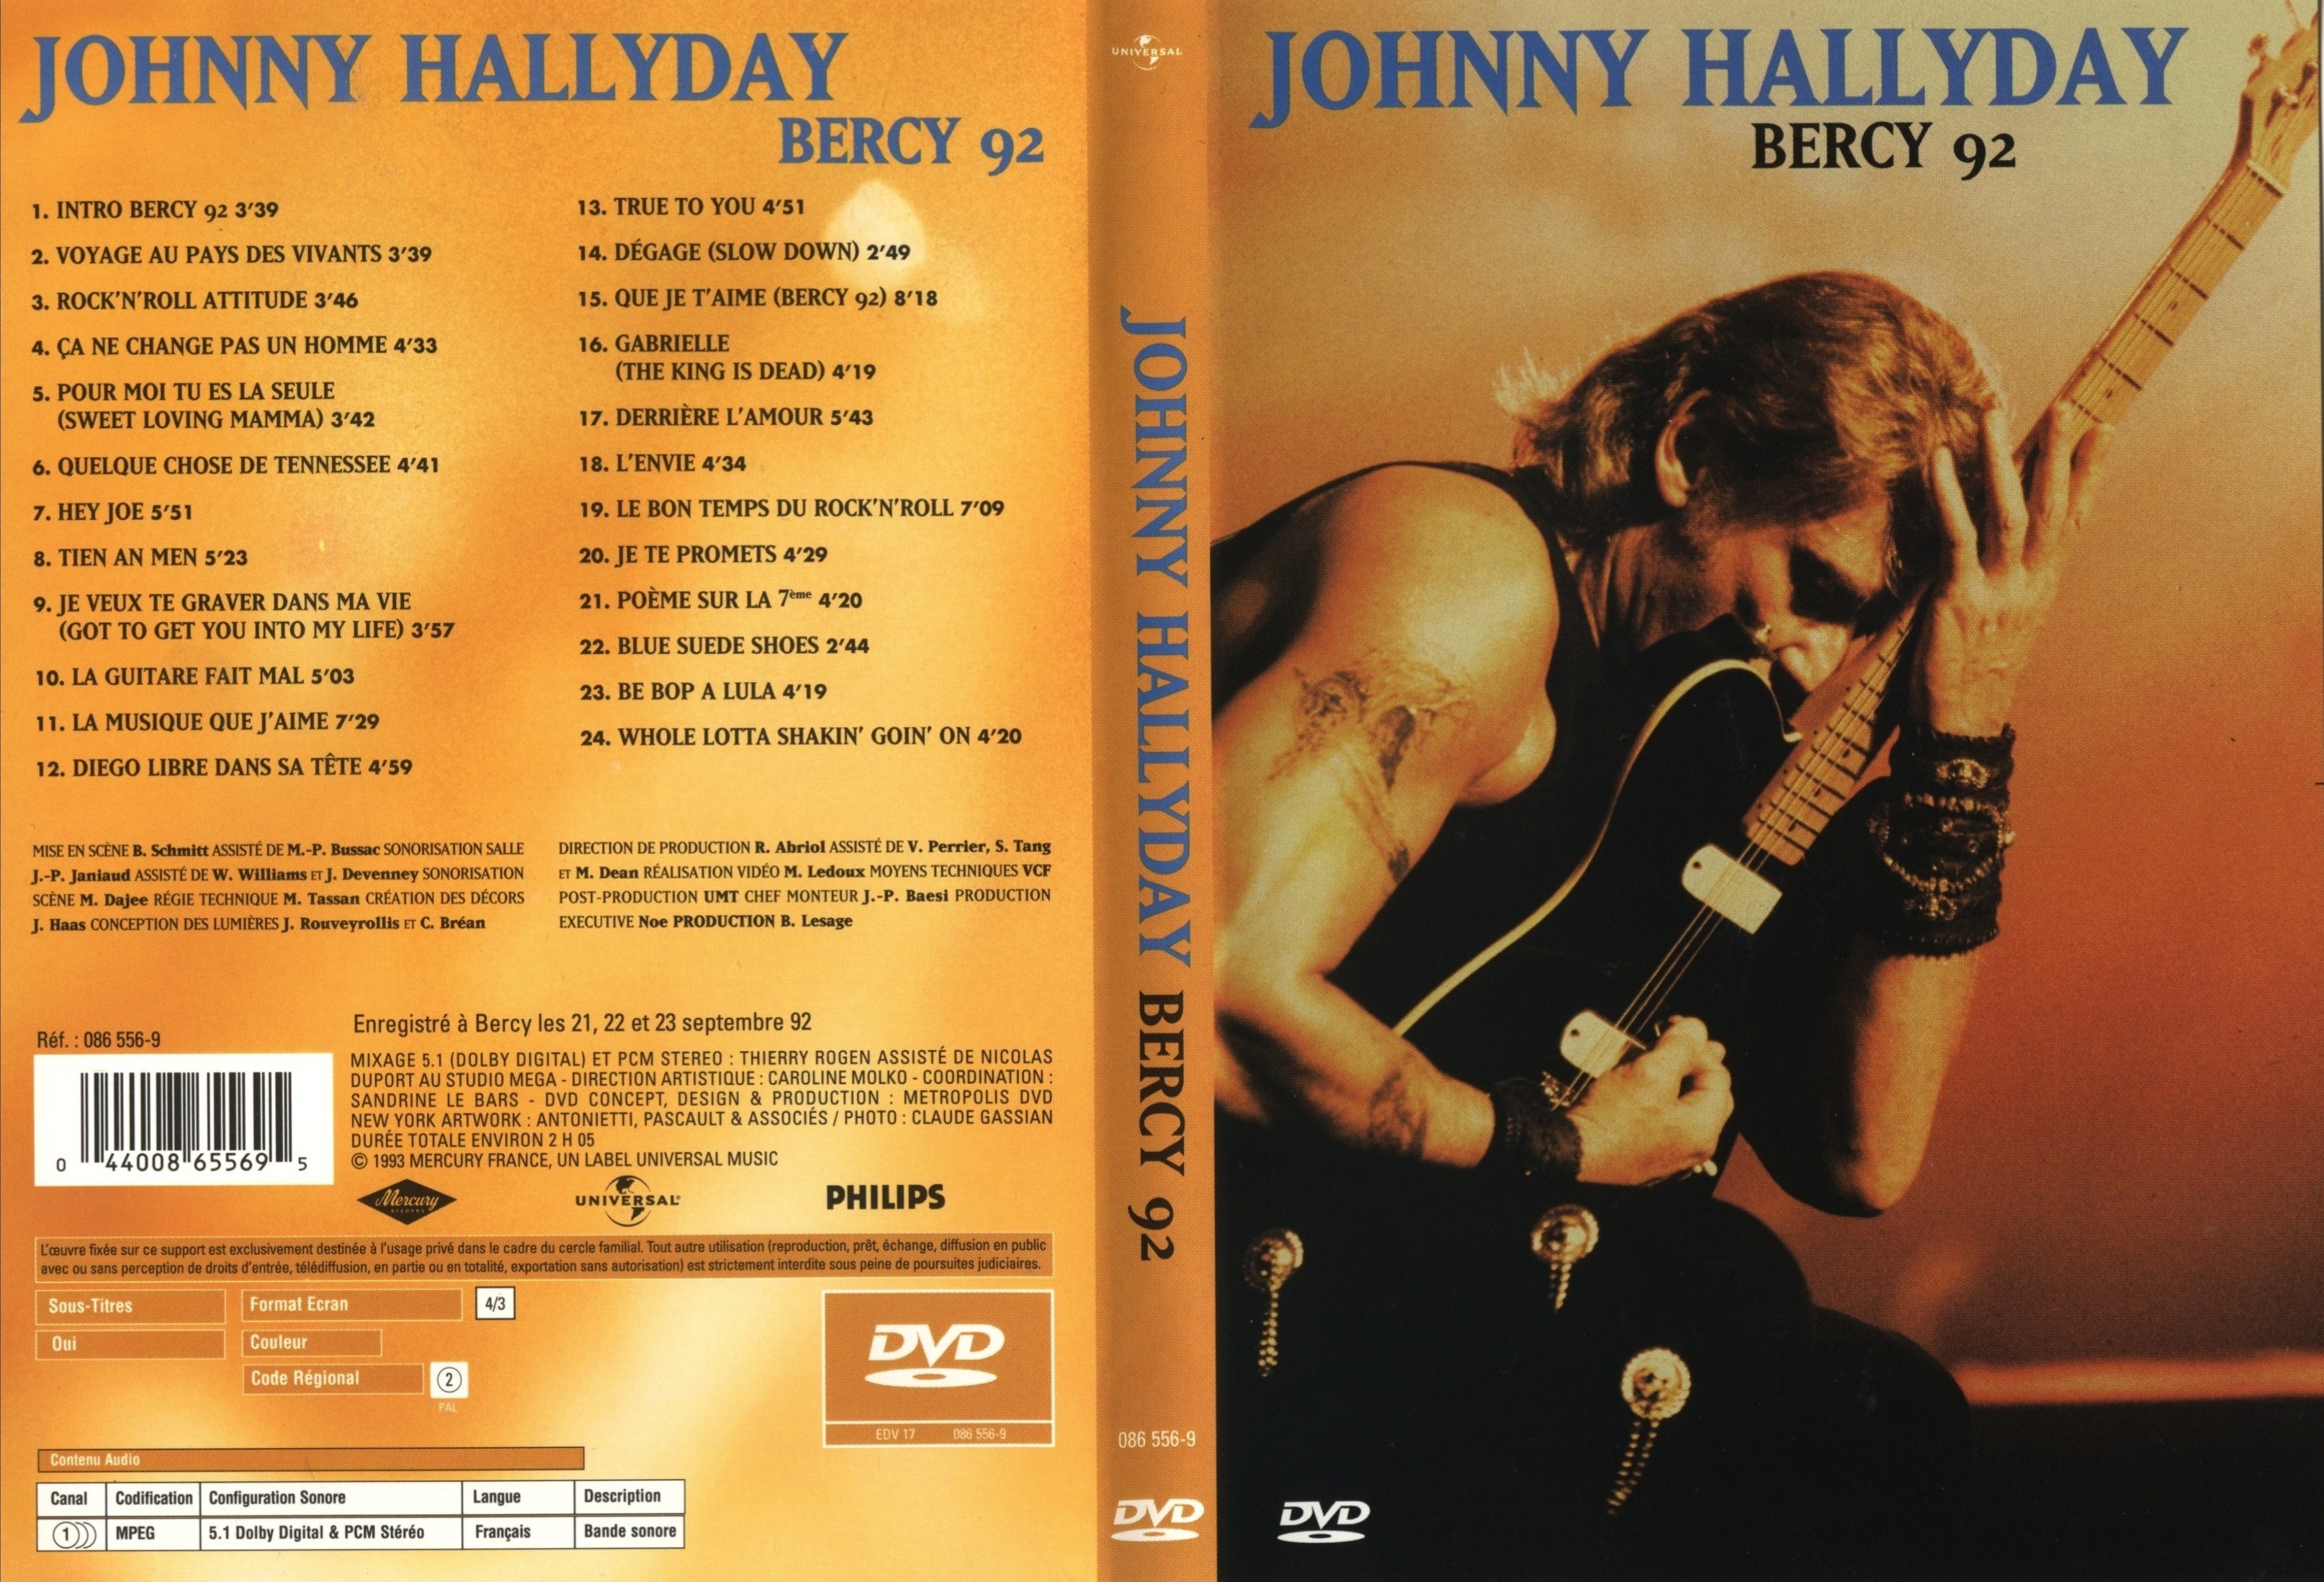 Jaquette DVD Johnny Hallyday Bercy 1992